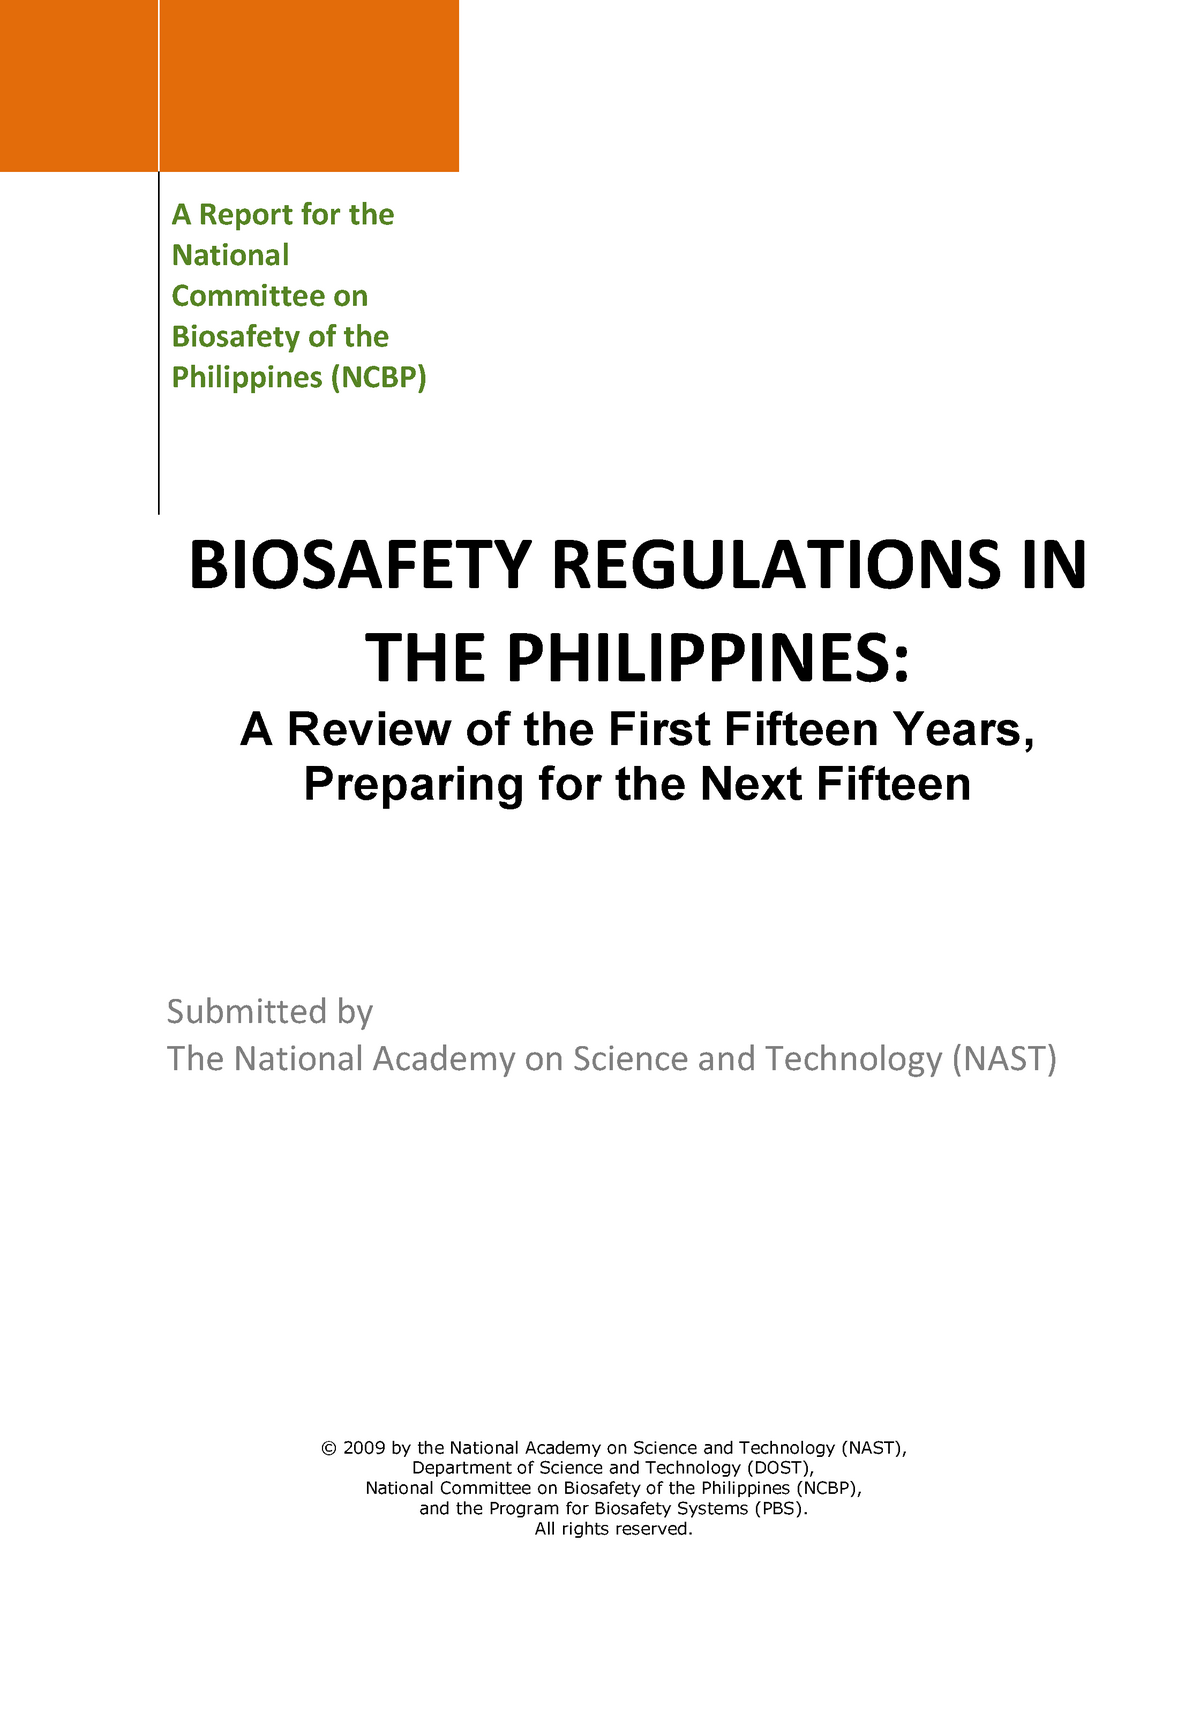 research paper about issues on philippine biosafety policies